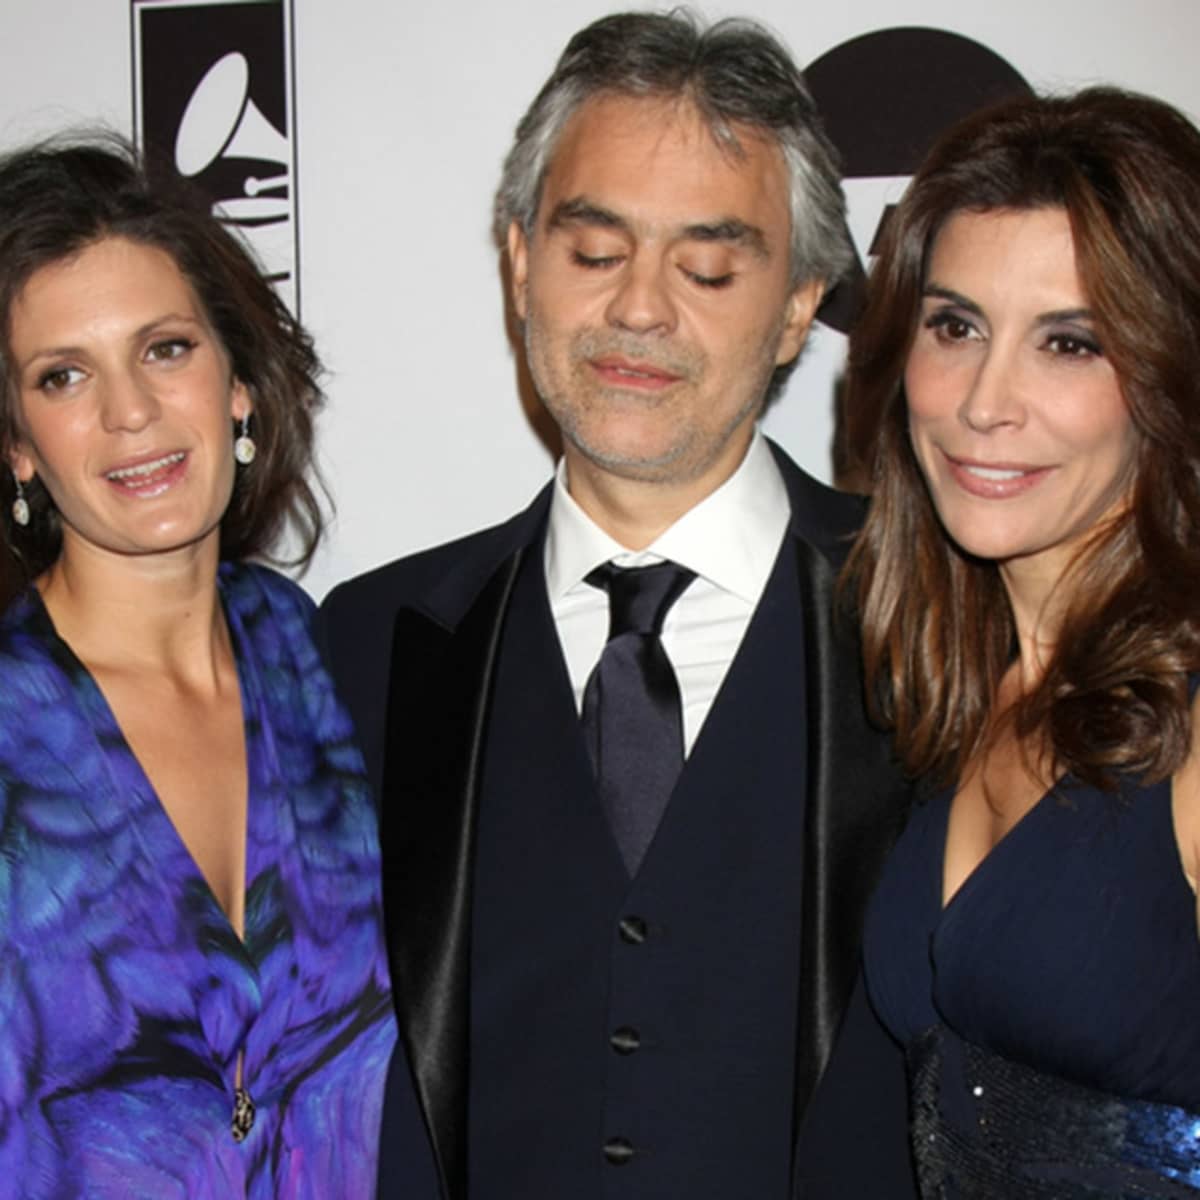 Andrea Bocelli steps in as last-minute understudy for his stranded